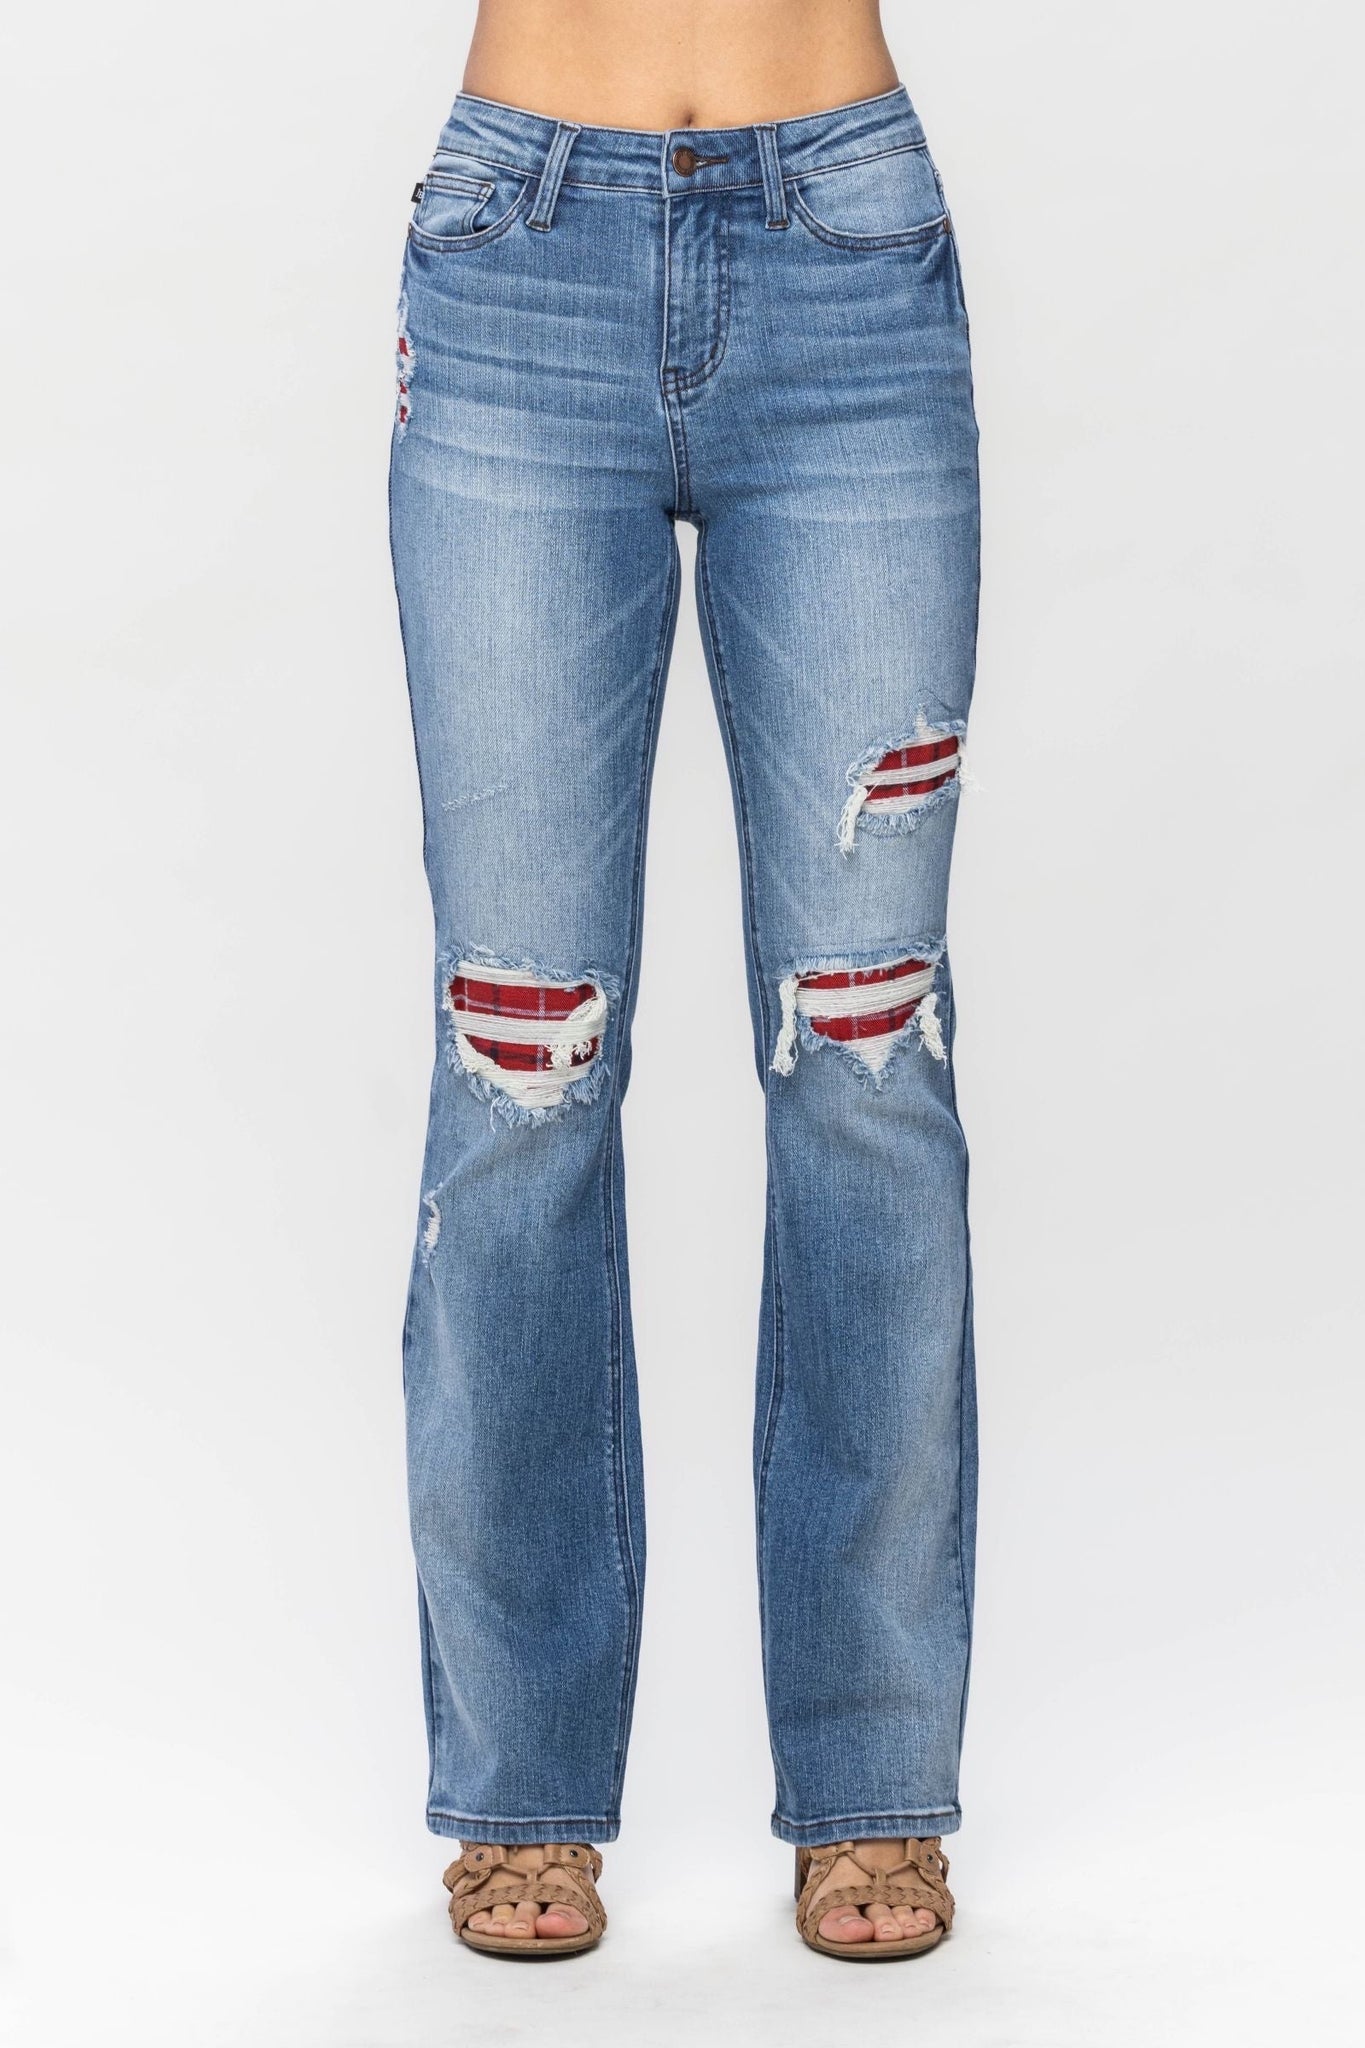 Judy Blue Mid Rise Bootcut Jeans With Plaid Patch Detail 88696 - Exclusive-Jeans-Sunshine and Wine Boutique